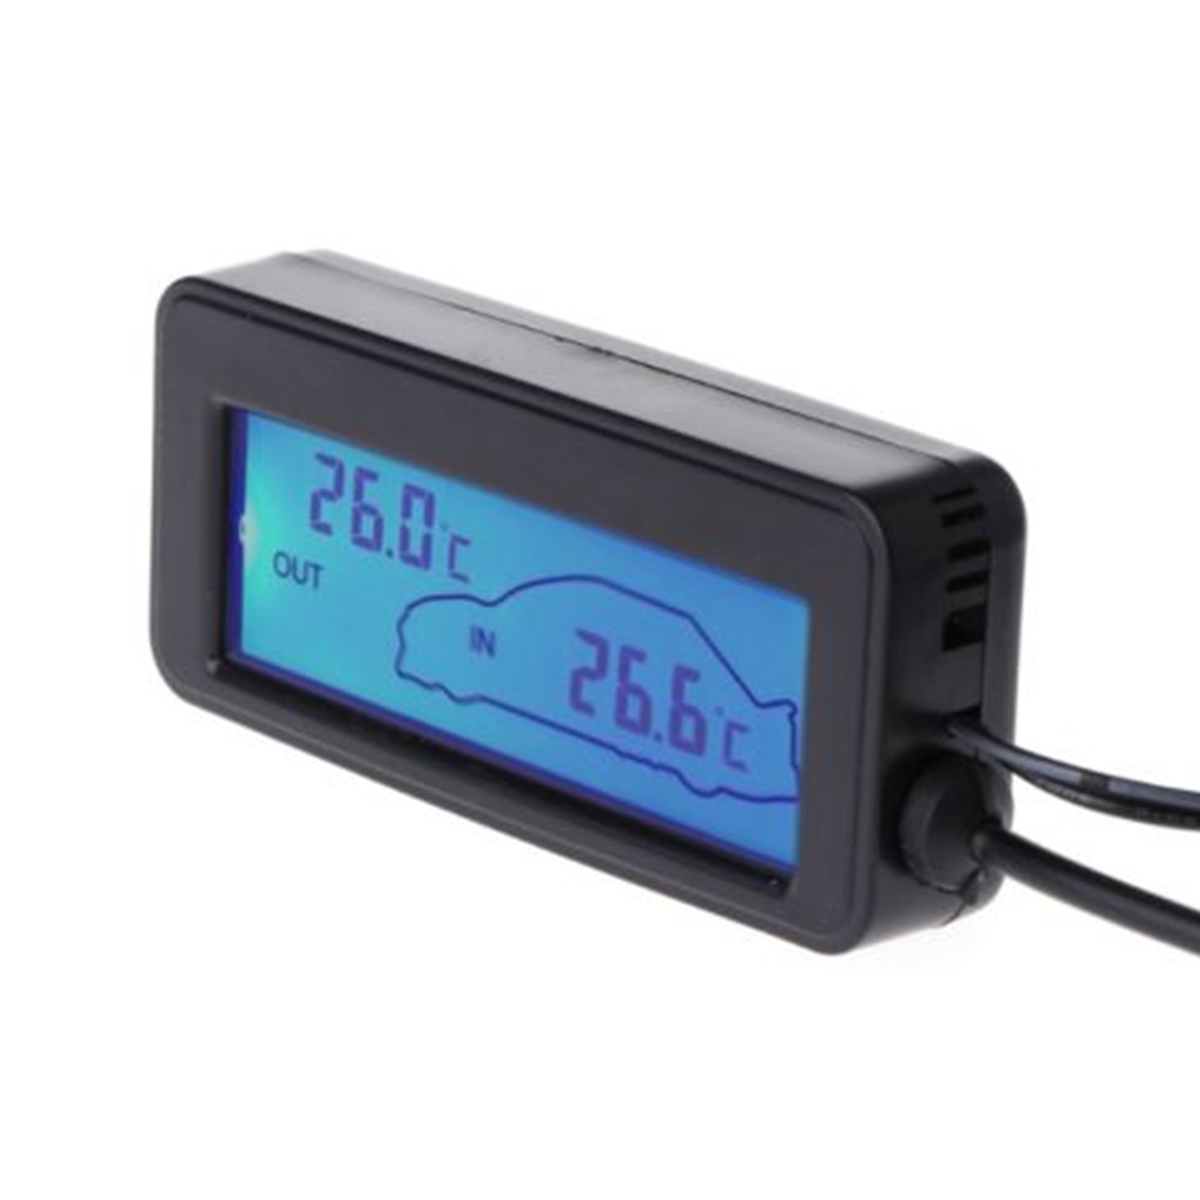 1PC Mini Lcd-scherm Digitale Thermometer Auto Inter/Exter Thermometer Ingebed Elektronische Digitale Thermometer 35